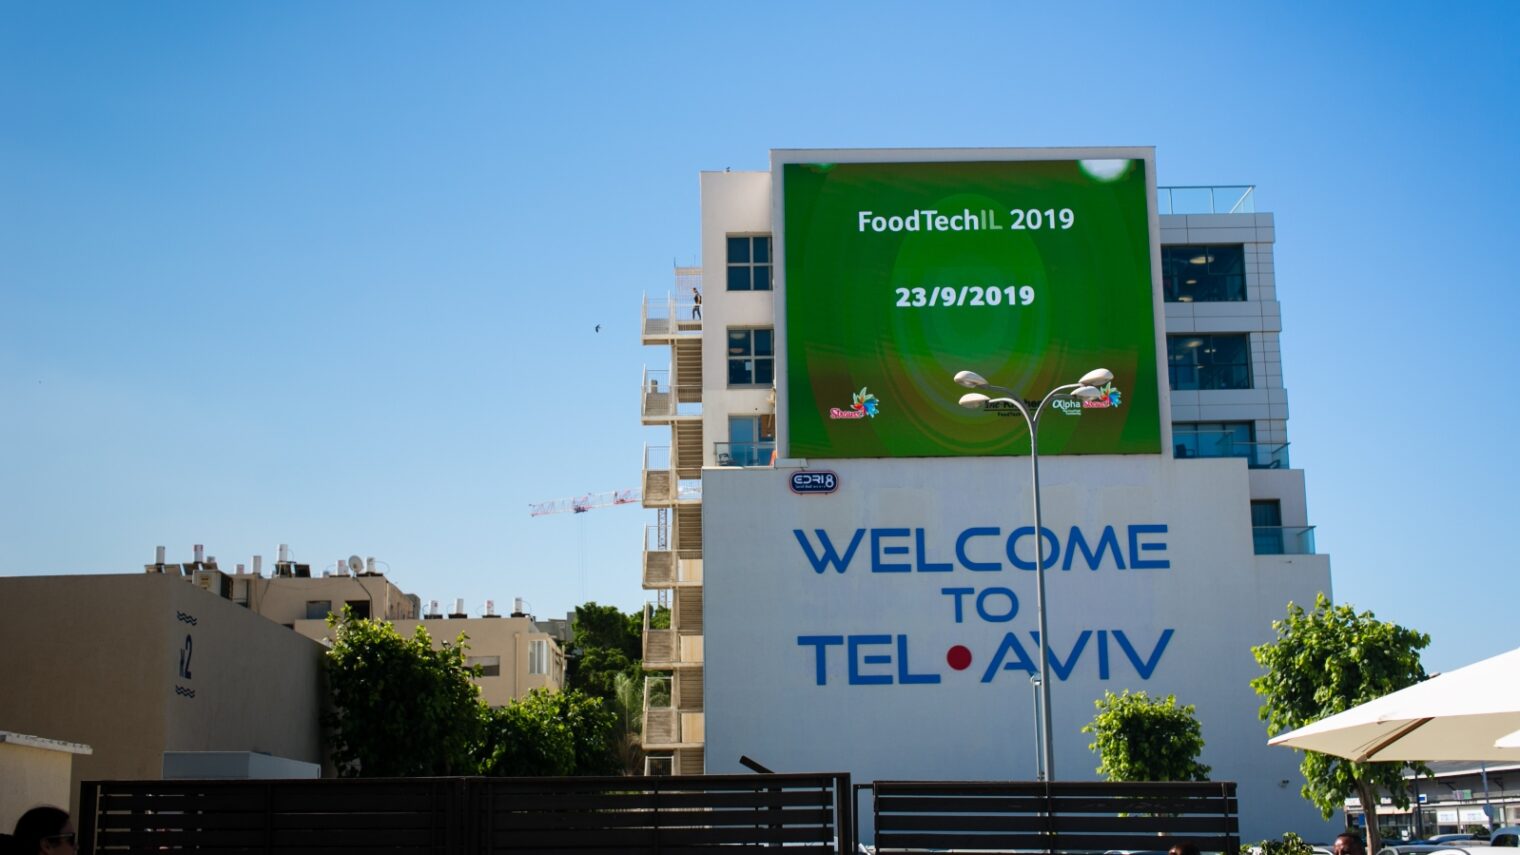 FoodTech 2019 drew 1,200 attendees from 30 countries. Photo by Achikam Ben Yosef